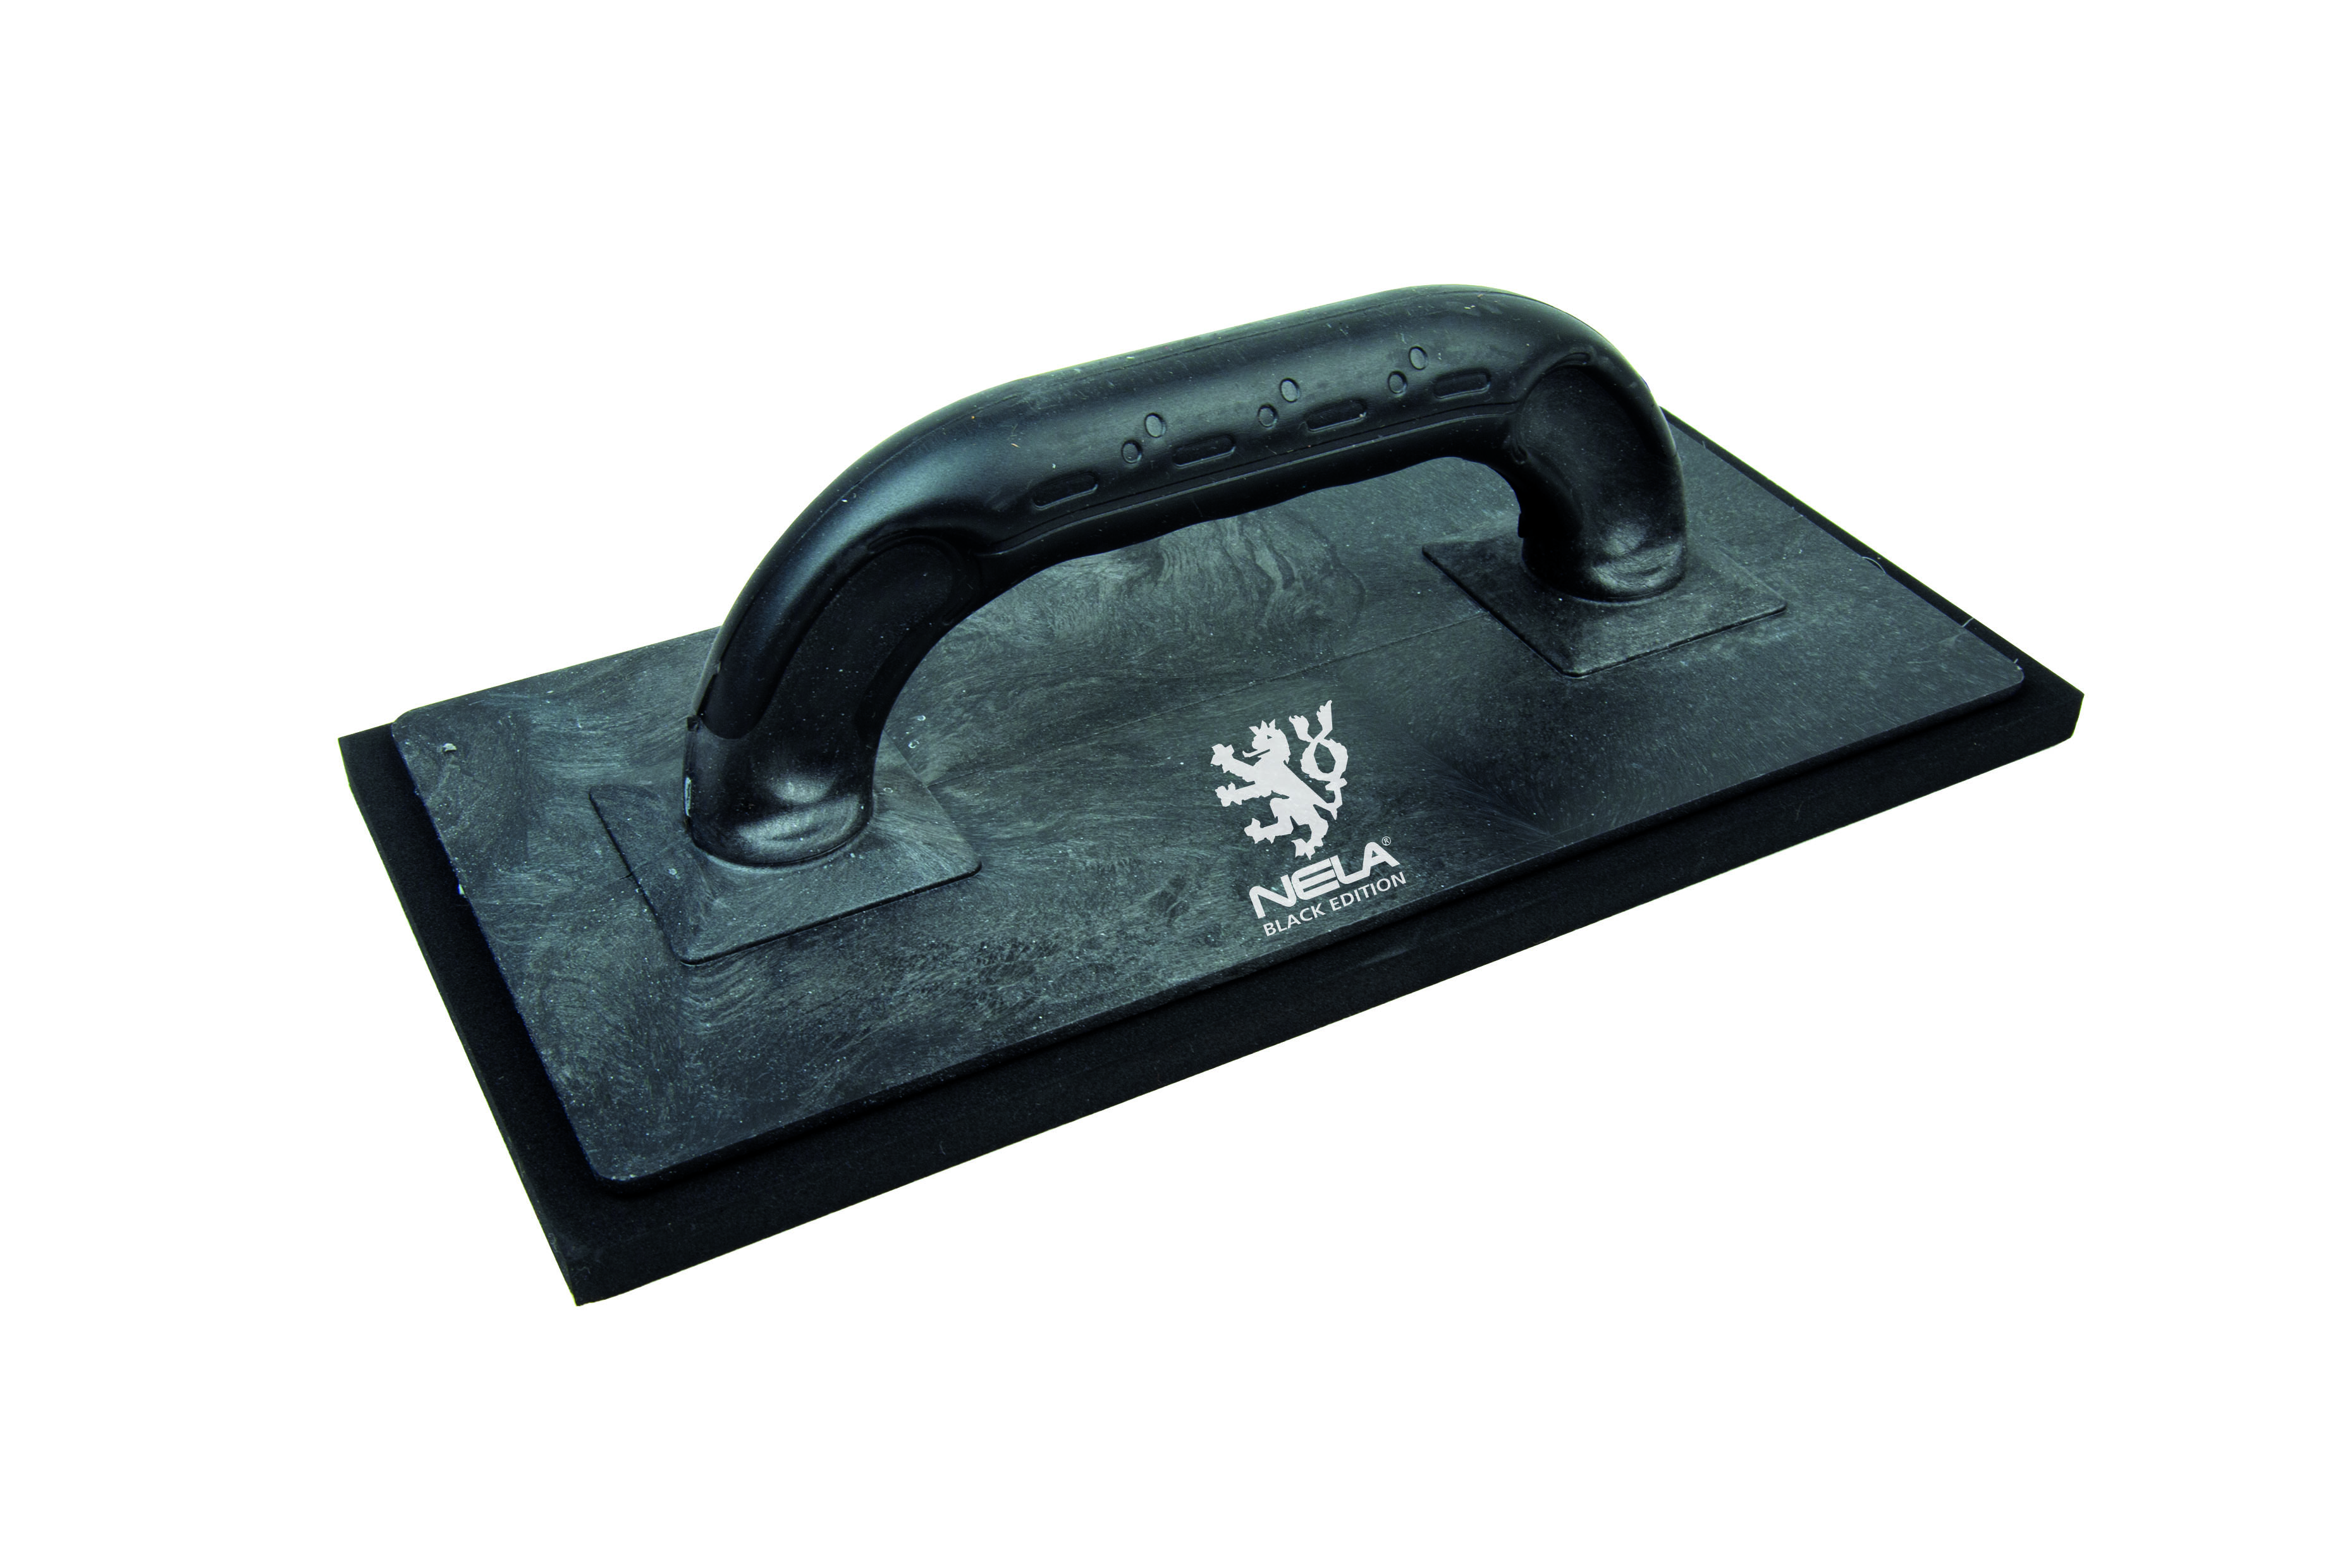 Black Edition Sponge Float with expanded rubber support - Black